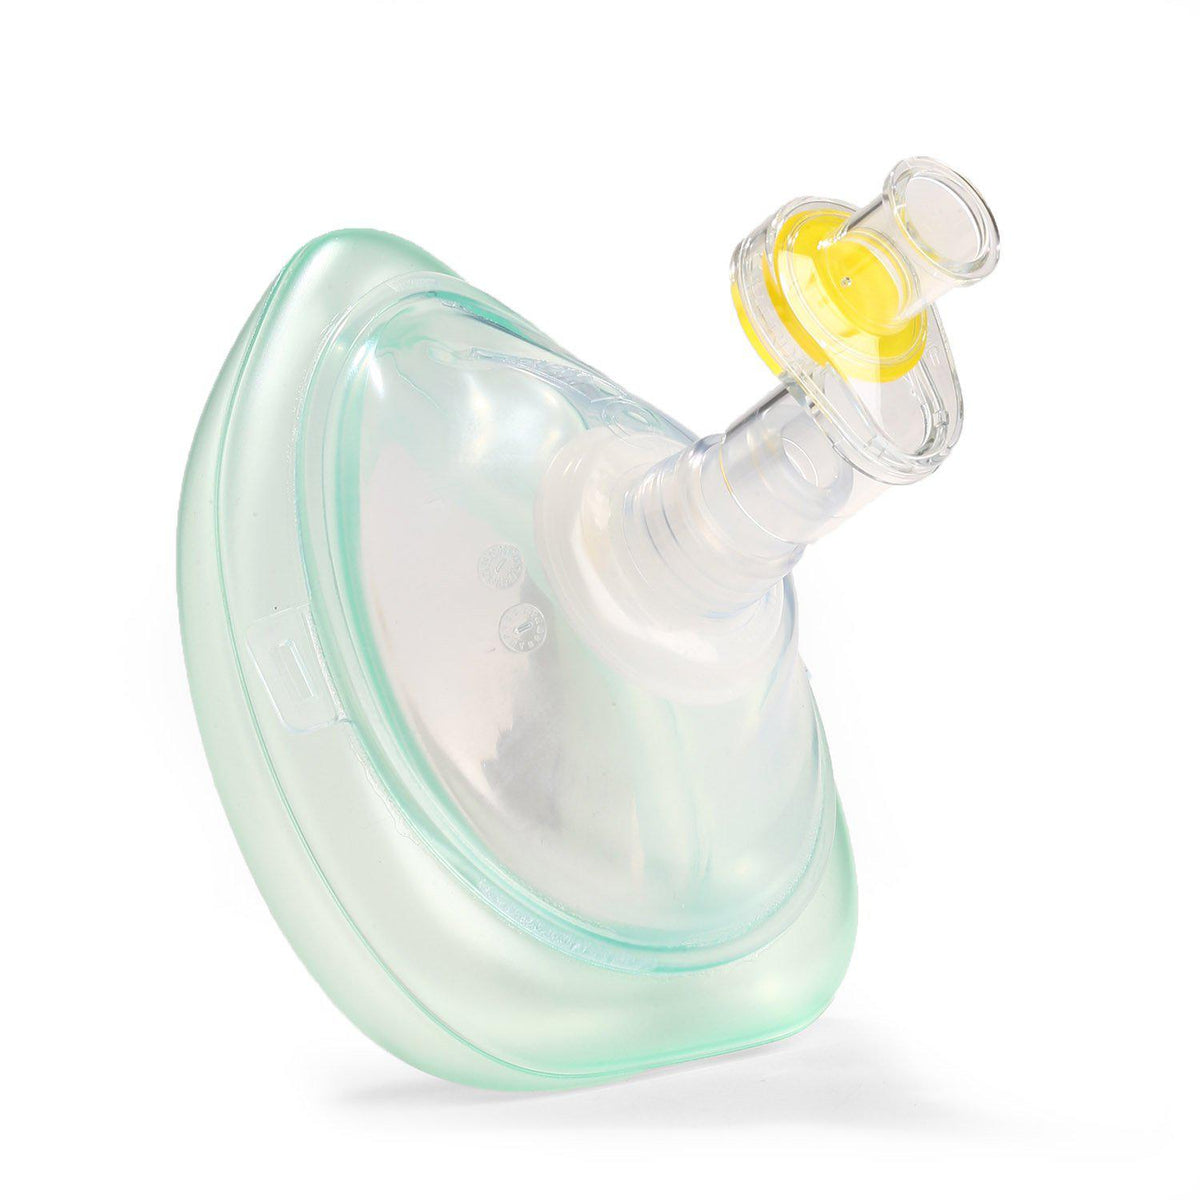 CPR Mask - Hard Case First Aid Supplies RestockYourKit.com 